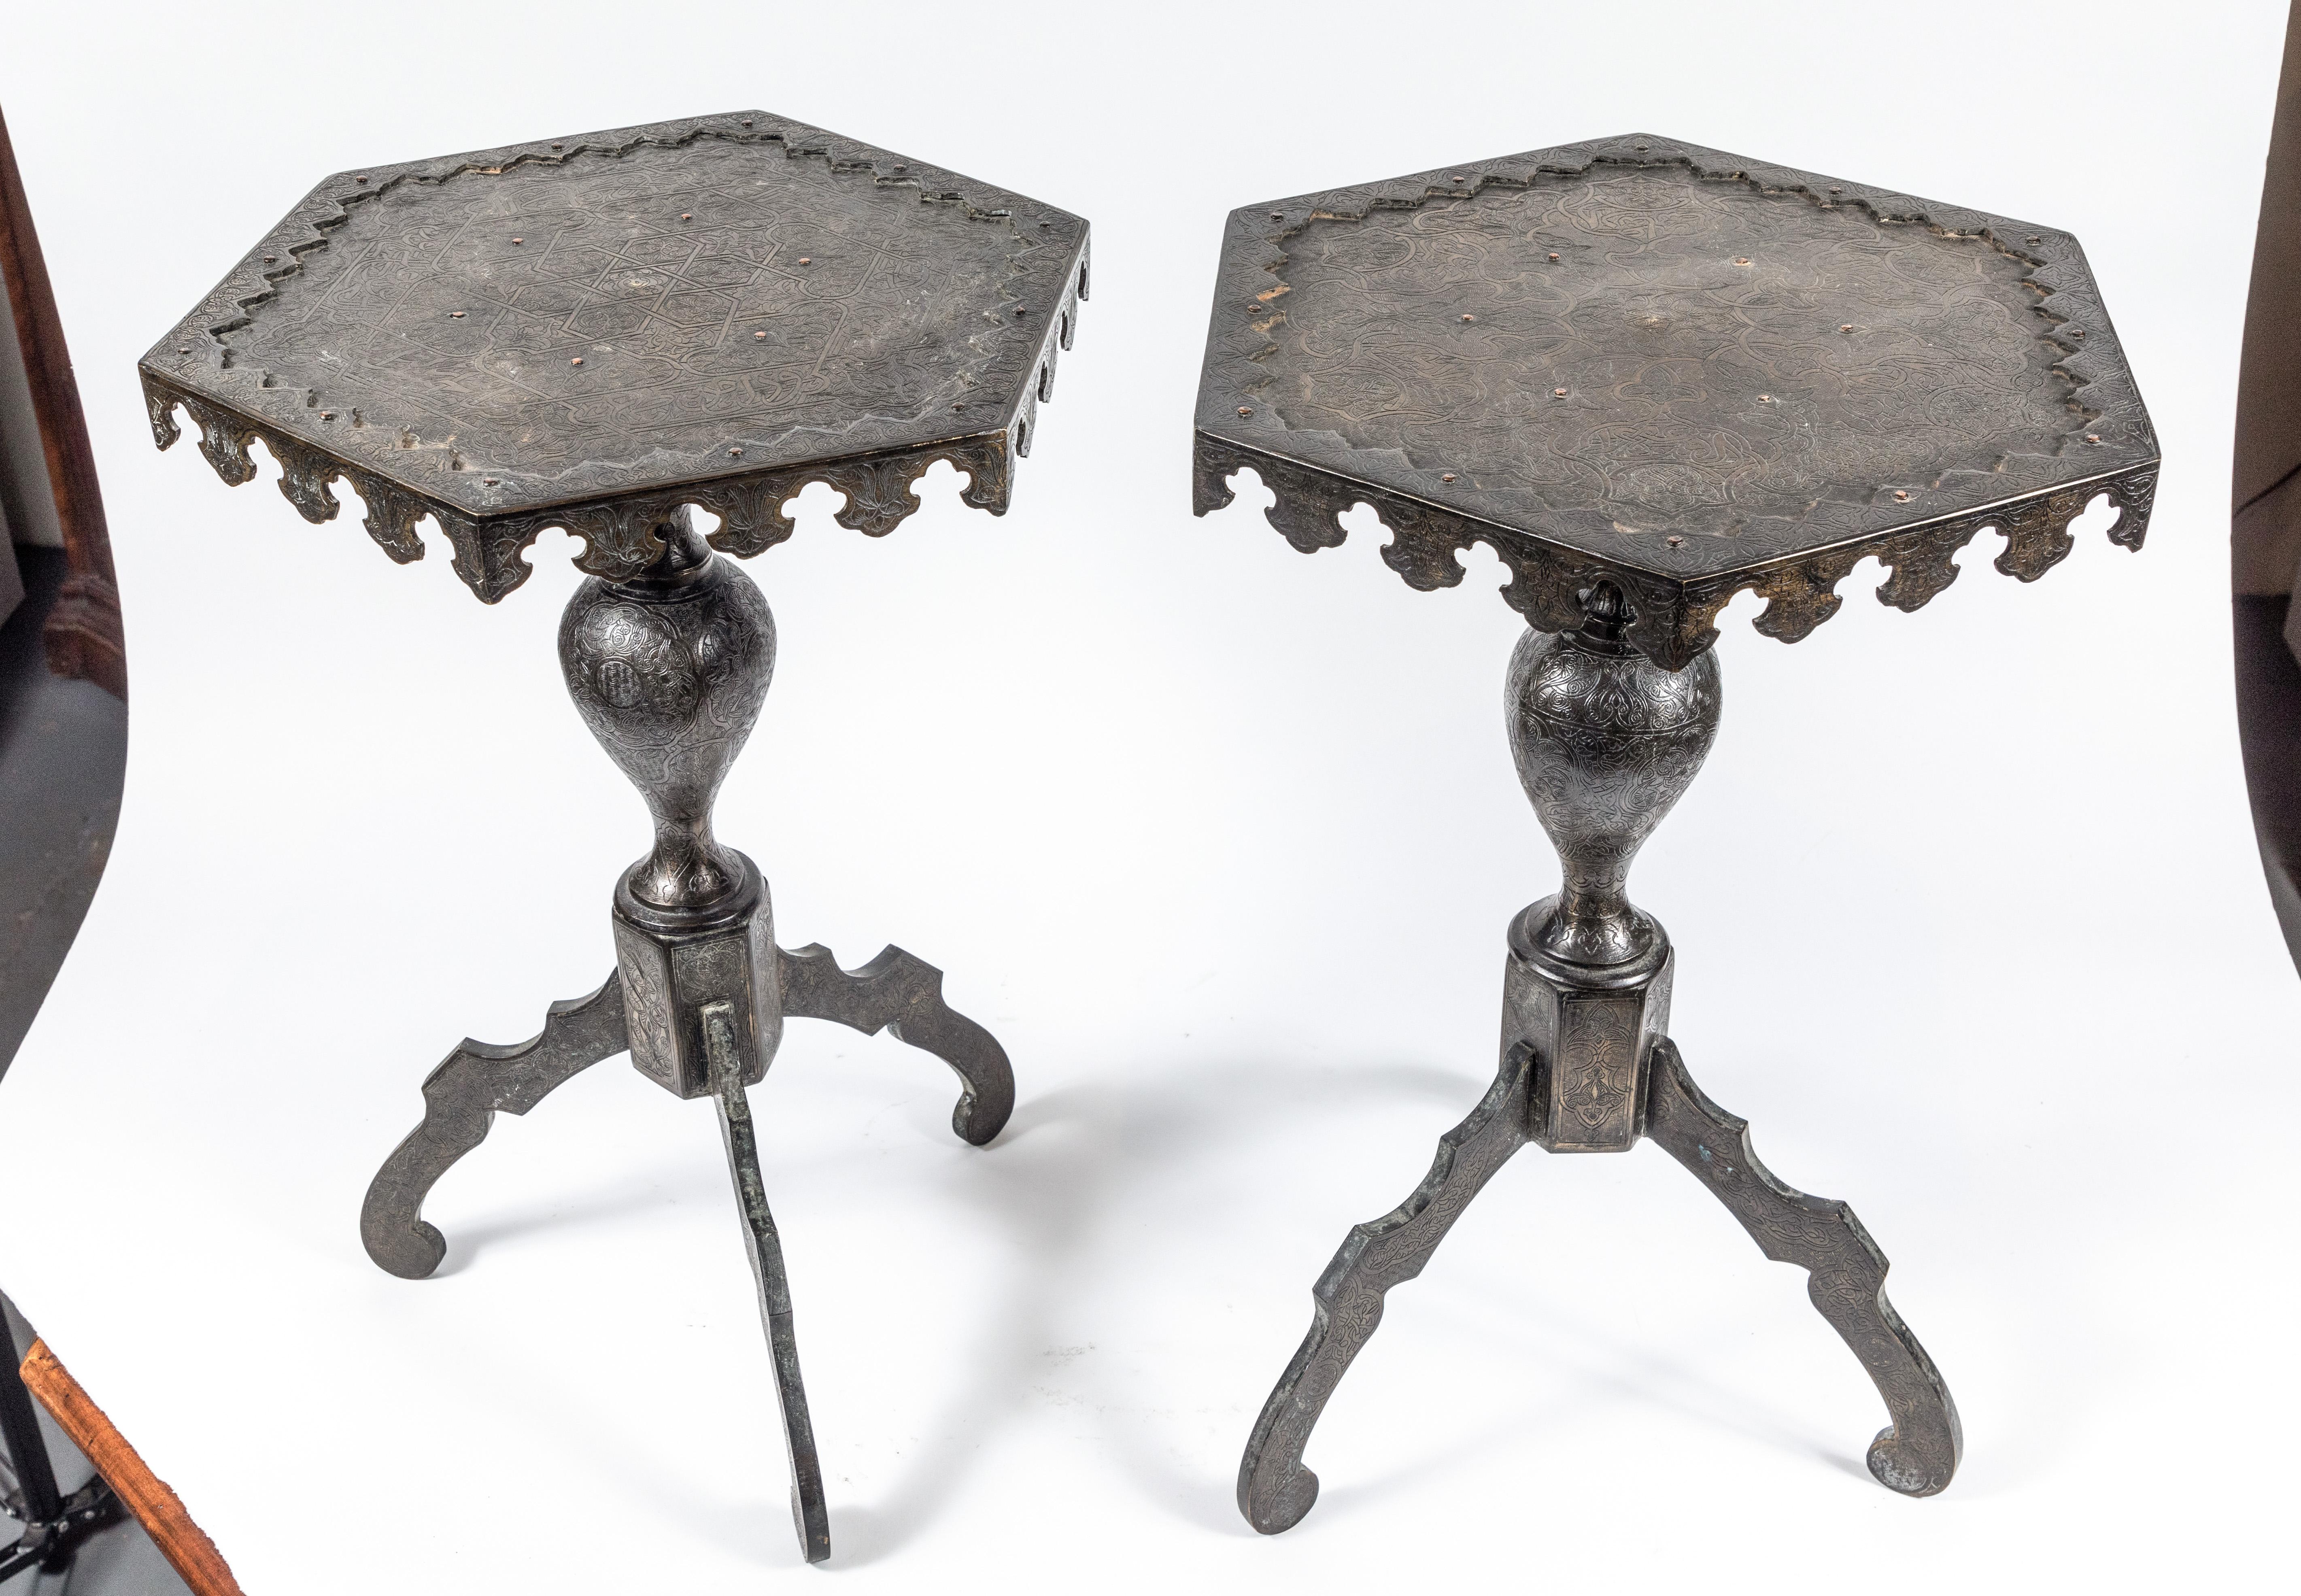 Pair of 19th Century, Solid Bronze, Arabic Side Tables (Gegossen)